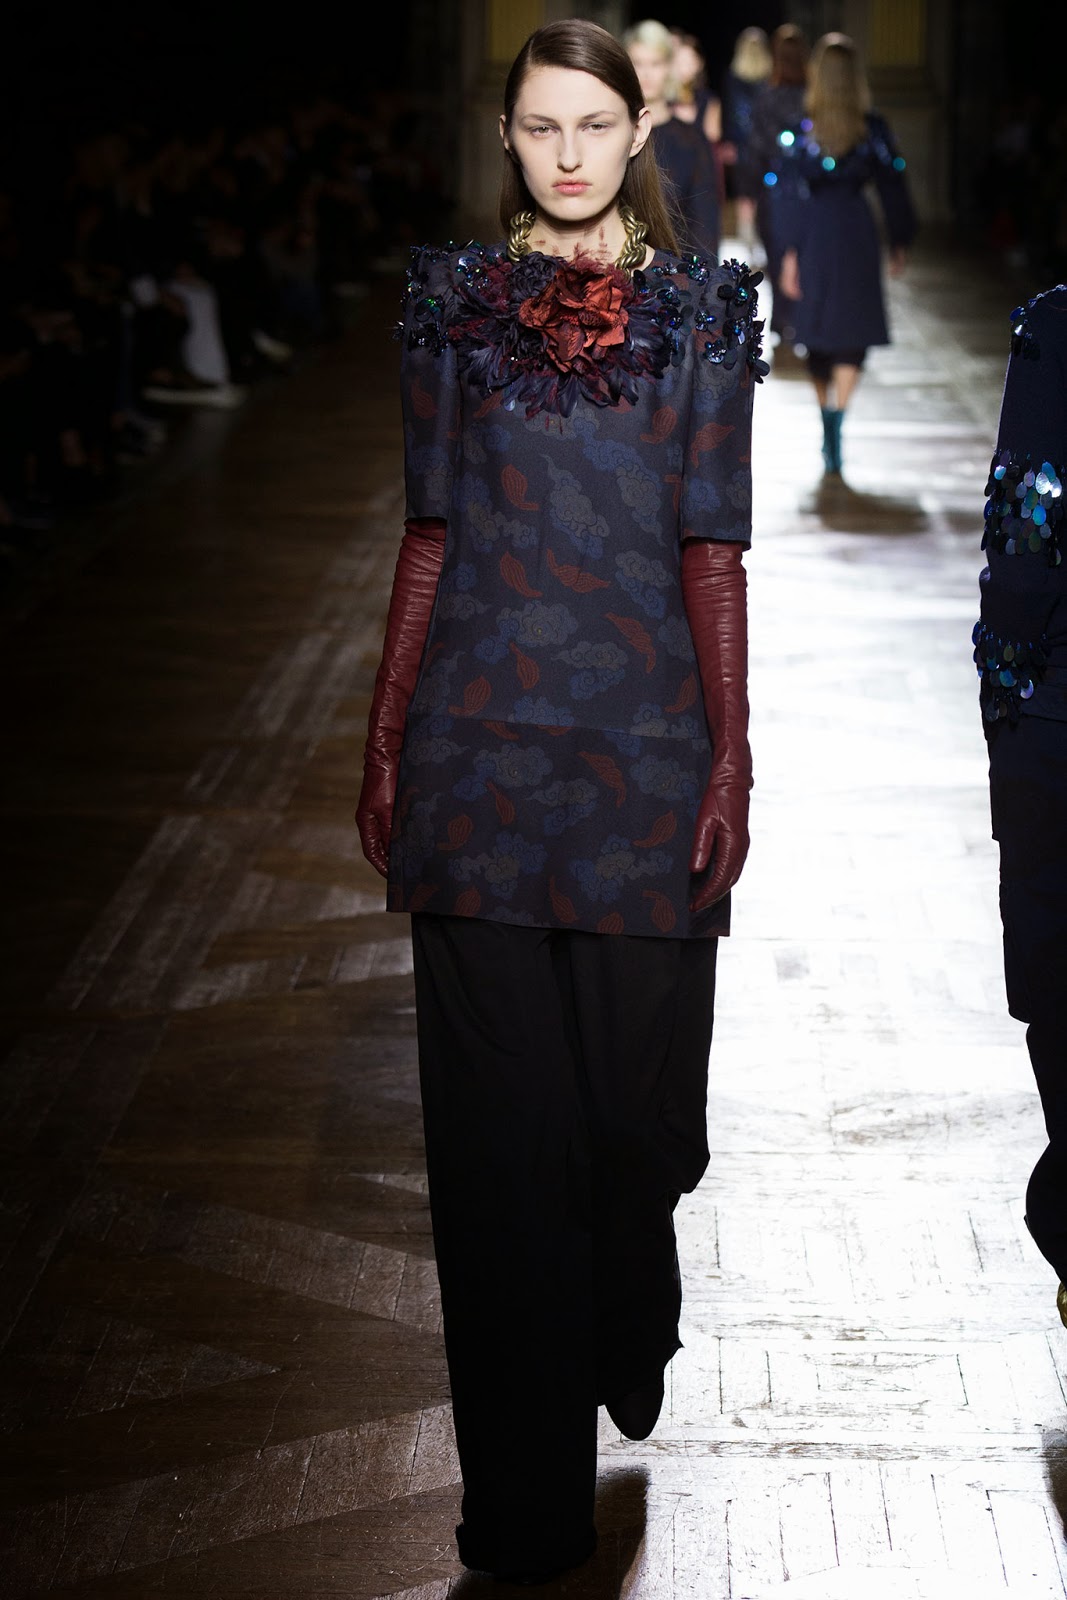 Rare Vintage: The Glamorous Granny and Dries van Noten Fall 2015